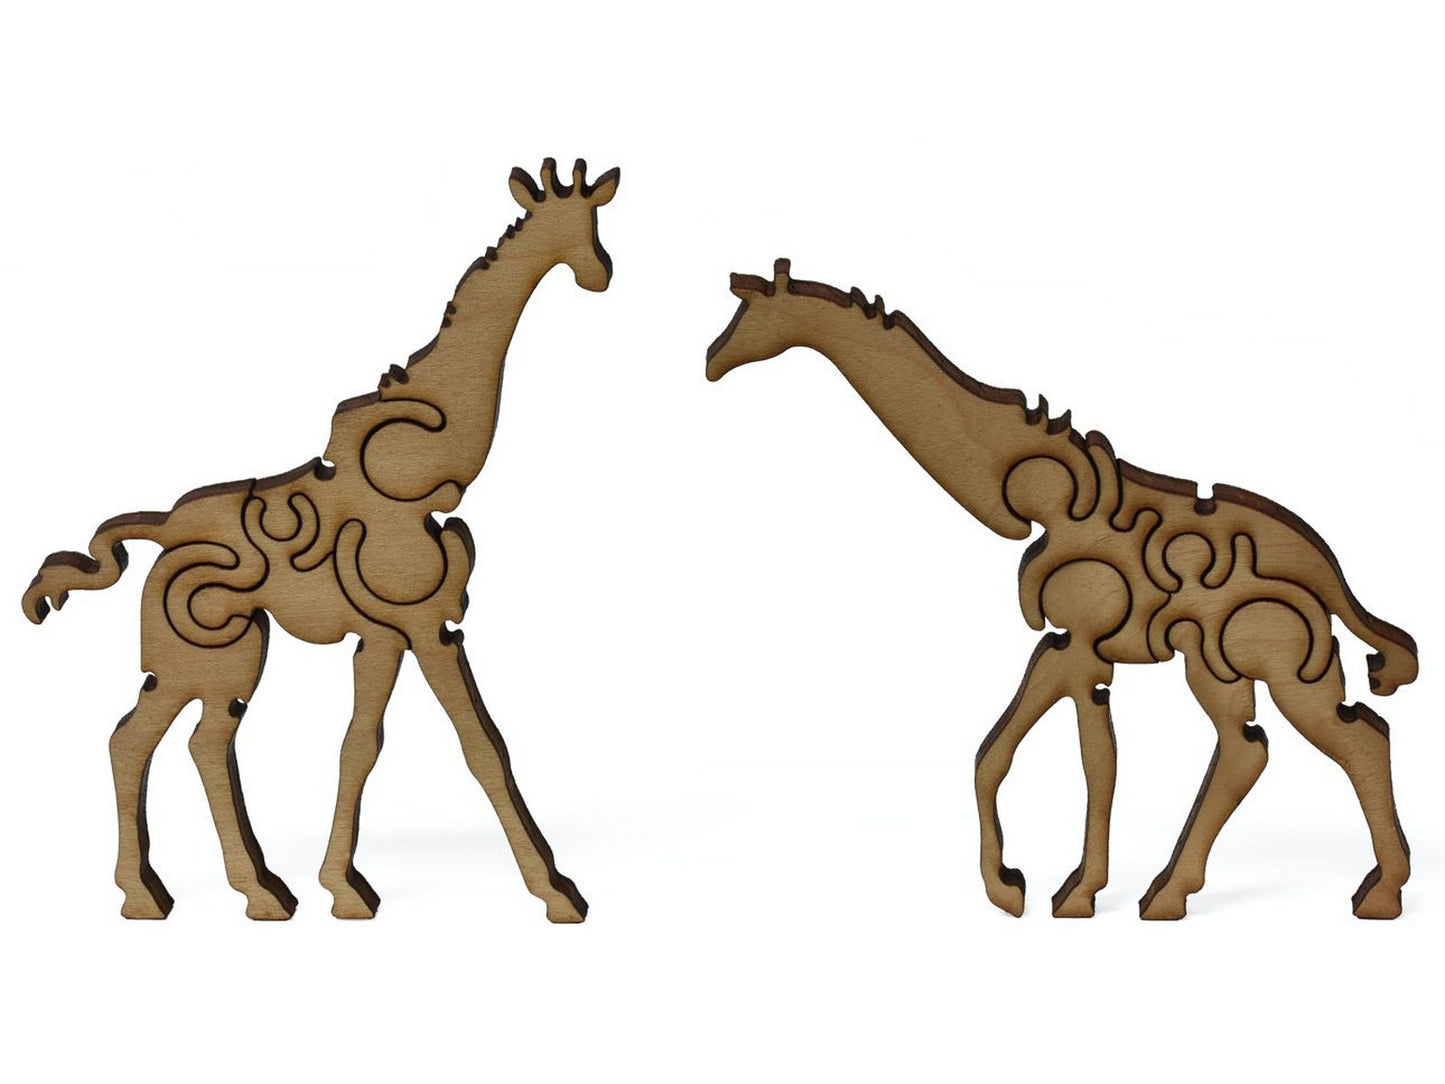 A closeup of pieces showing two multi-piece giraffes.